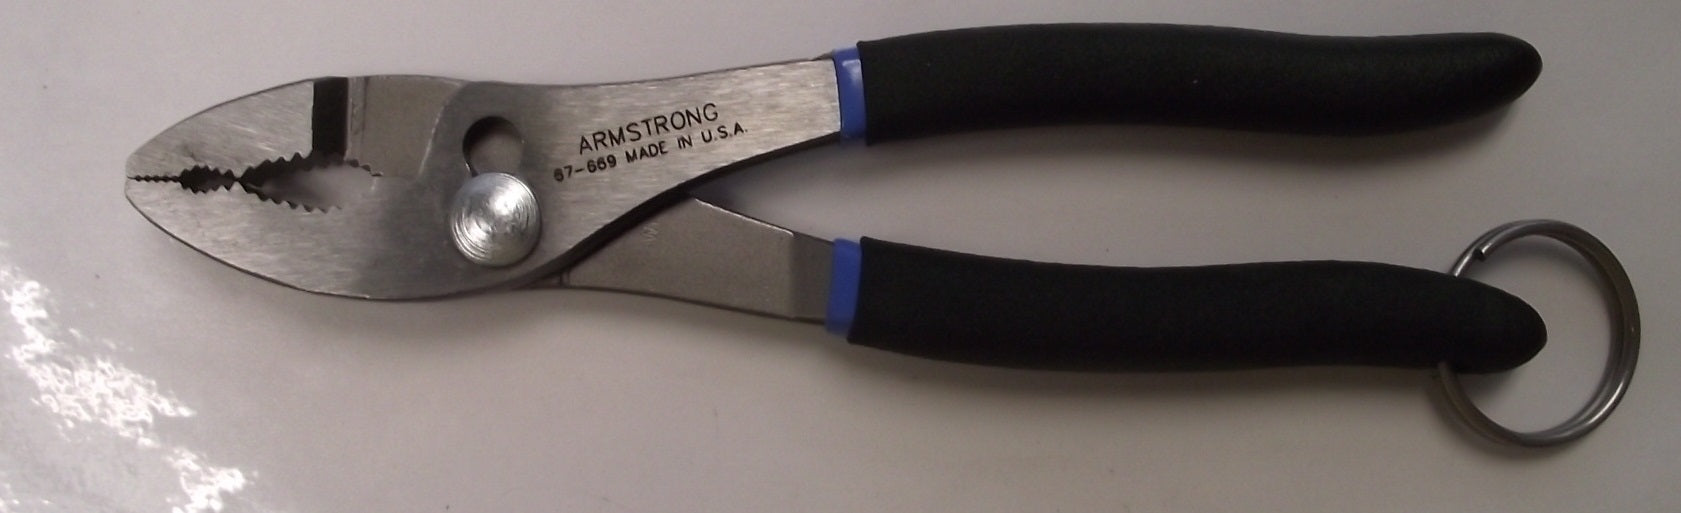 Armstrong 67-669TH 8" Slip Joint Pliers With Grip USA